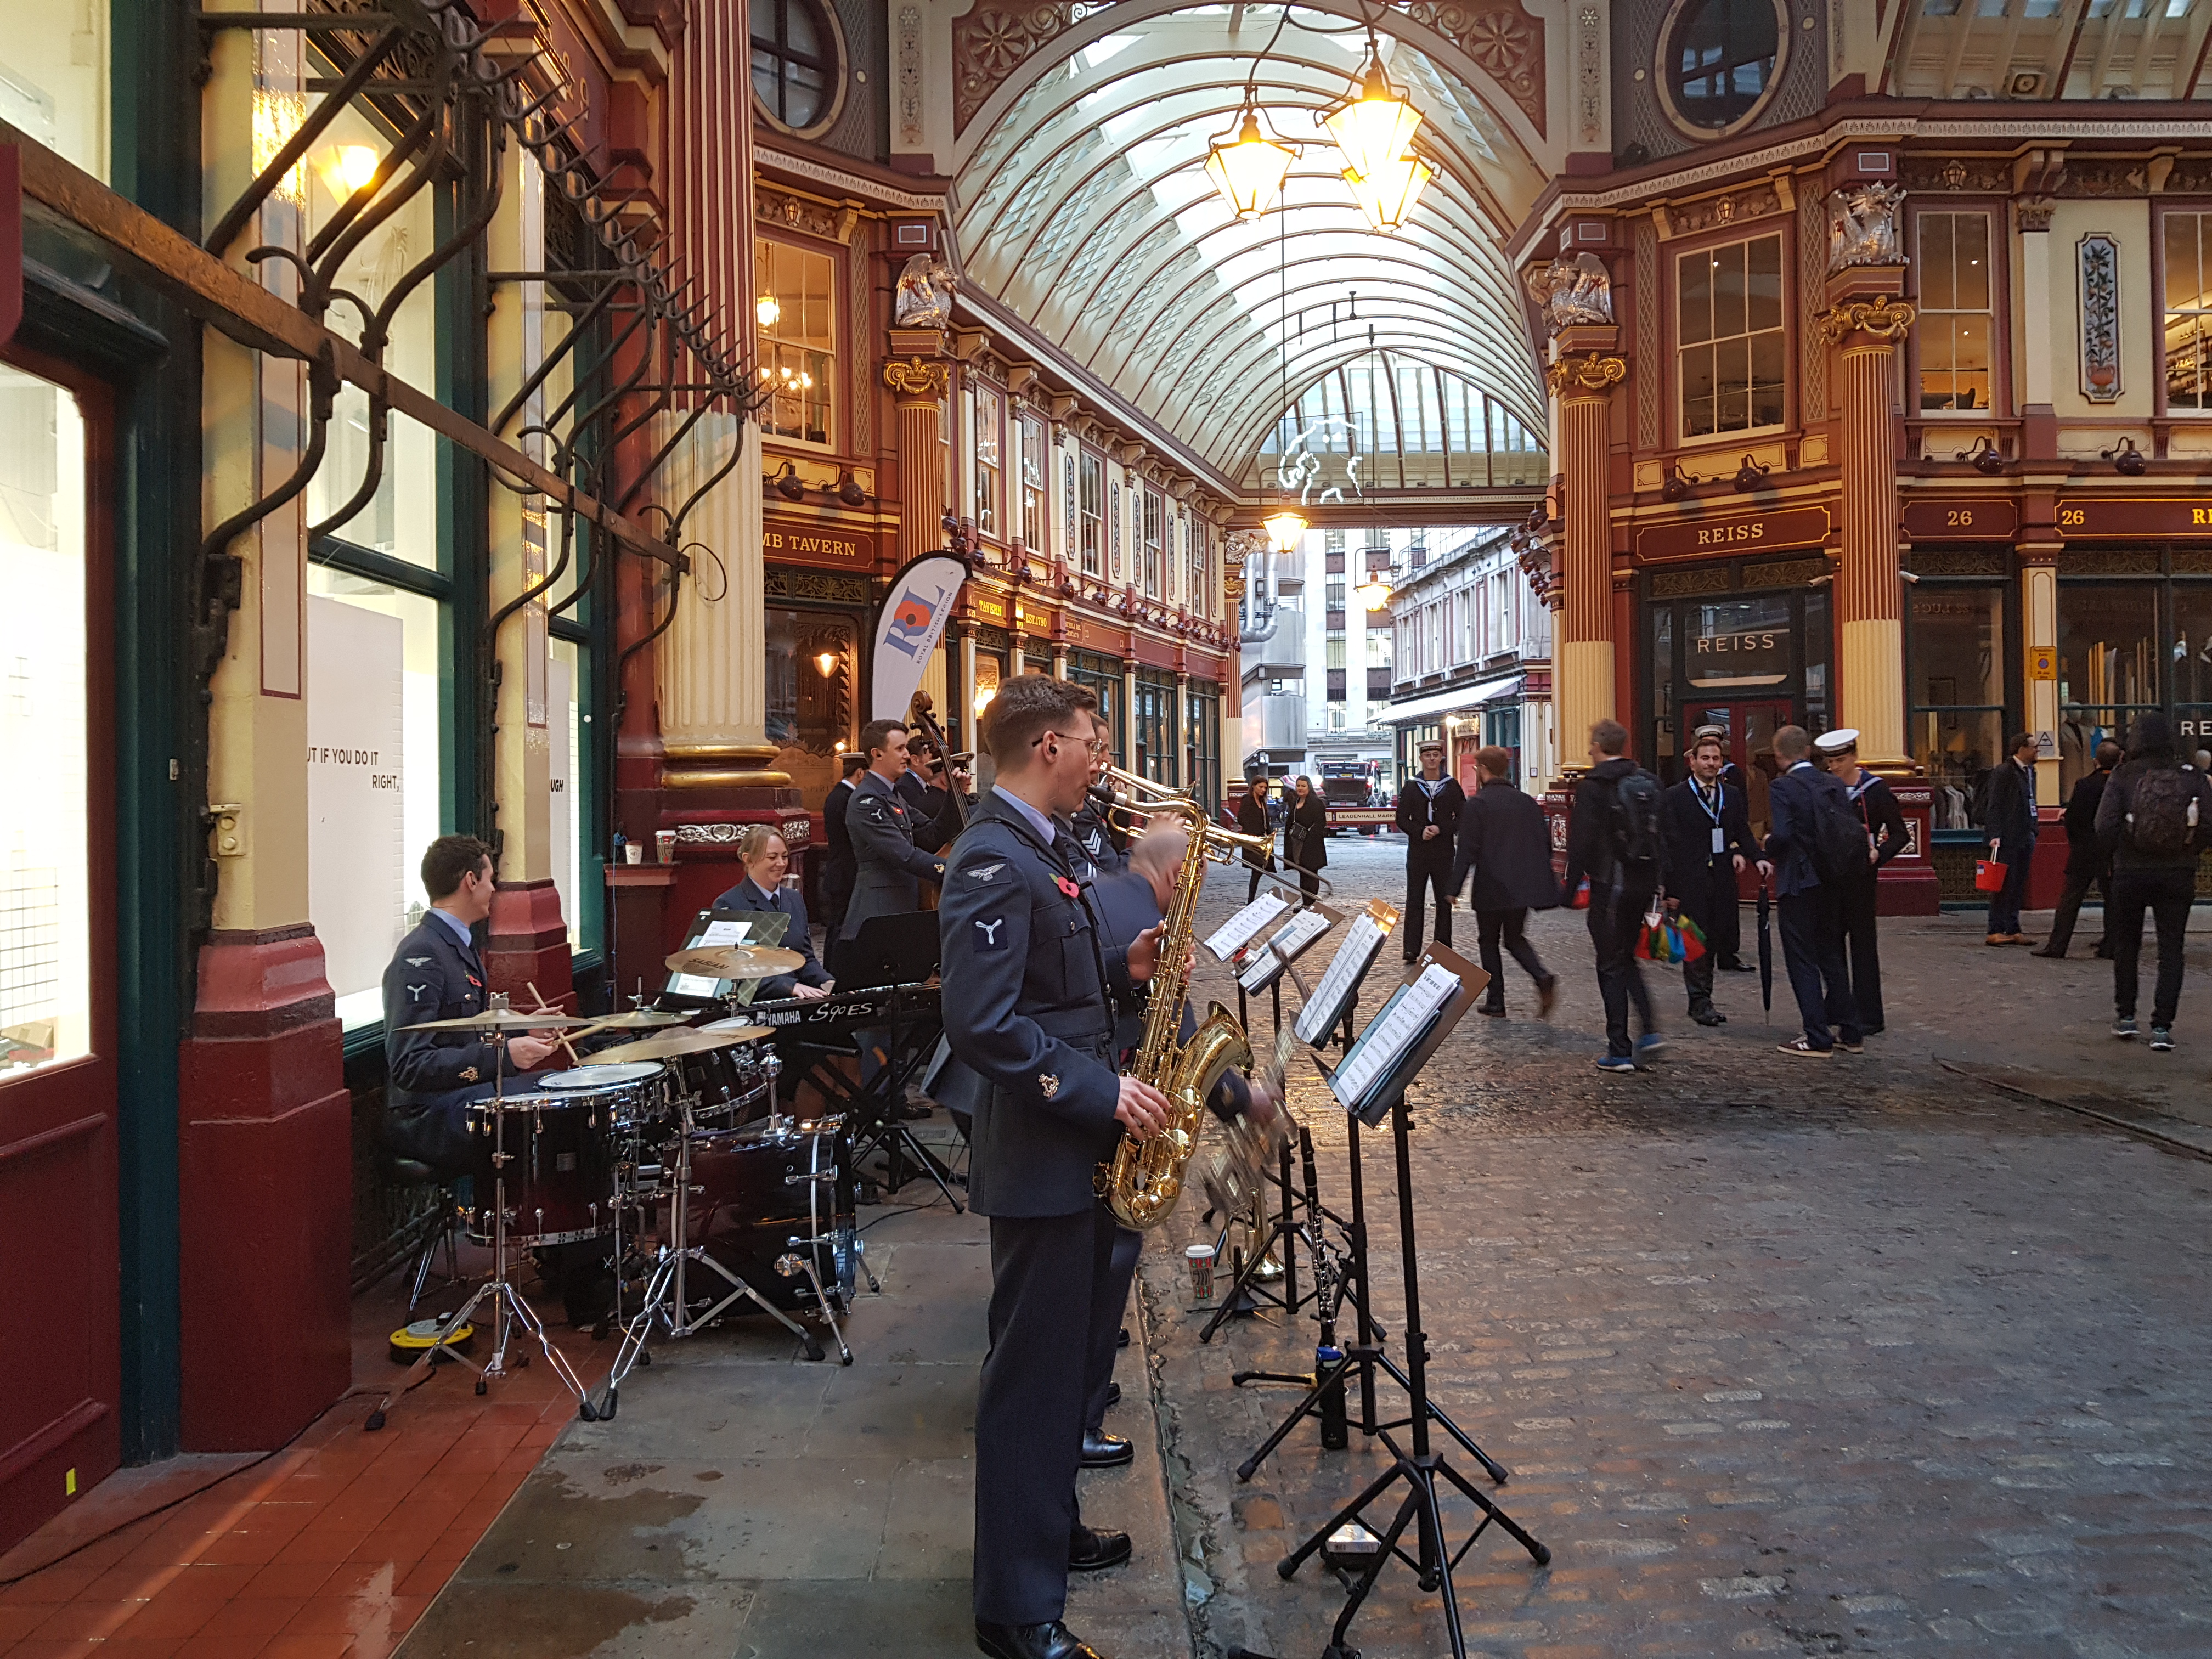 Image shows RAF Musicians performing in a shopping centre.